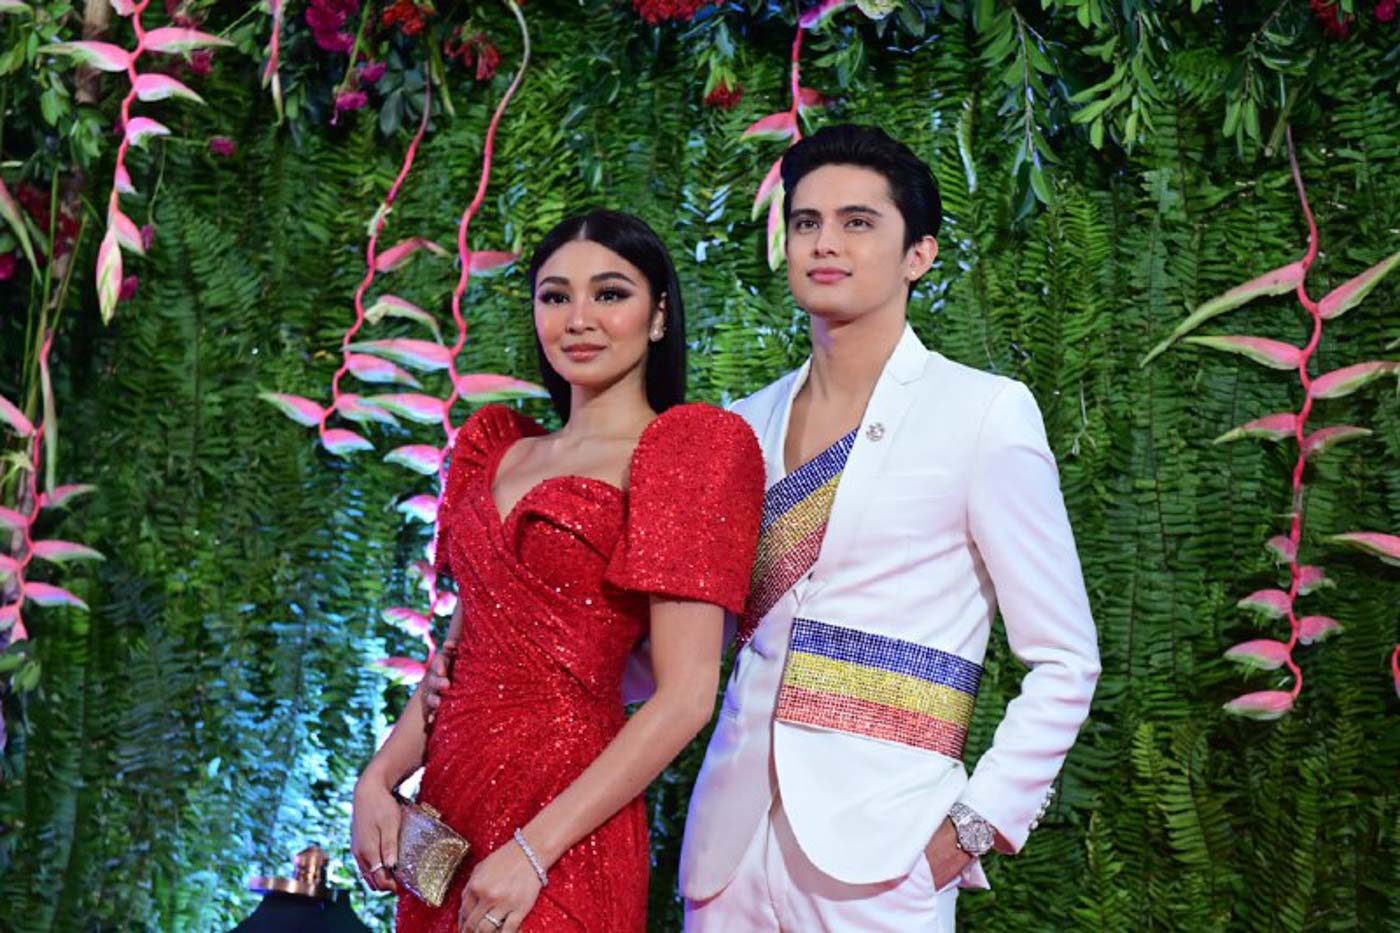 James Reid on Nadine Lustre: ‘No one understood me the way that she did’